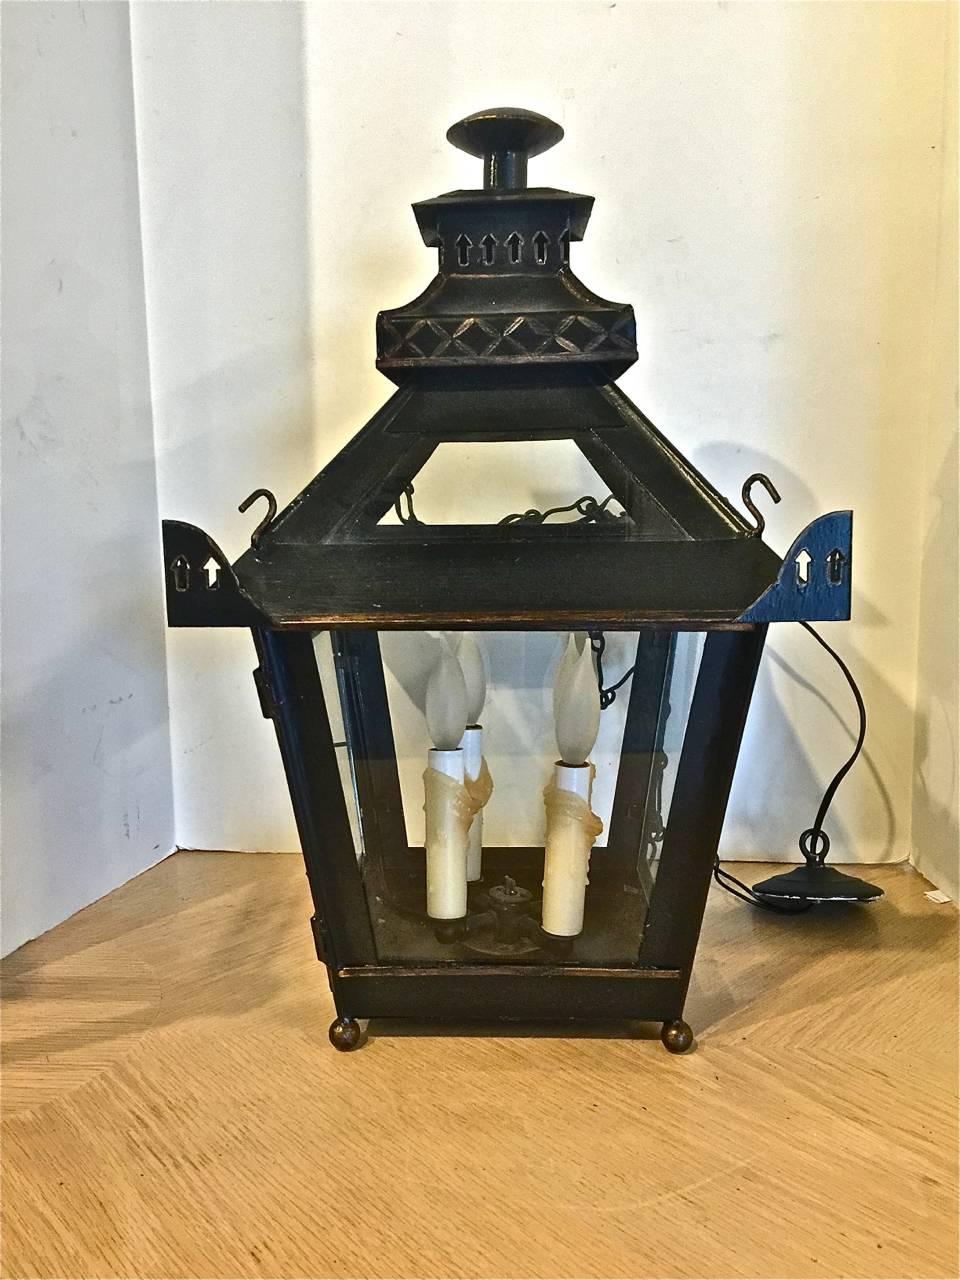 This is a charming pair of English Regency style chinoiserie lanterns in pagoda form. The lanterns date to the late 20th century and are in excellent condition. The lanterns feature electrical fittings of four candle lights and are suspended on